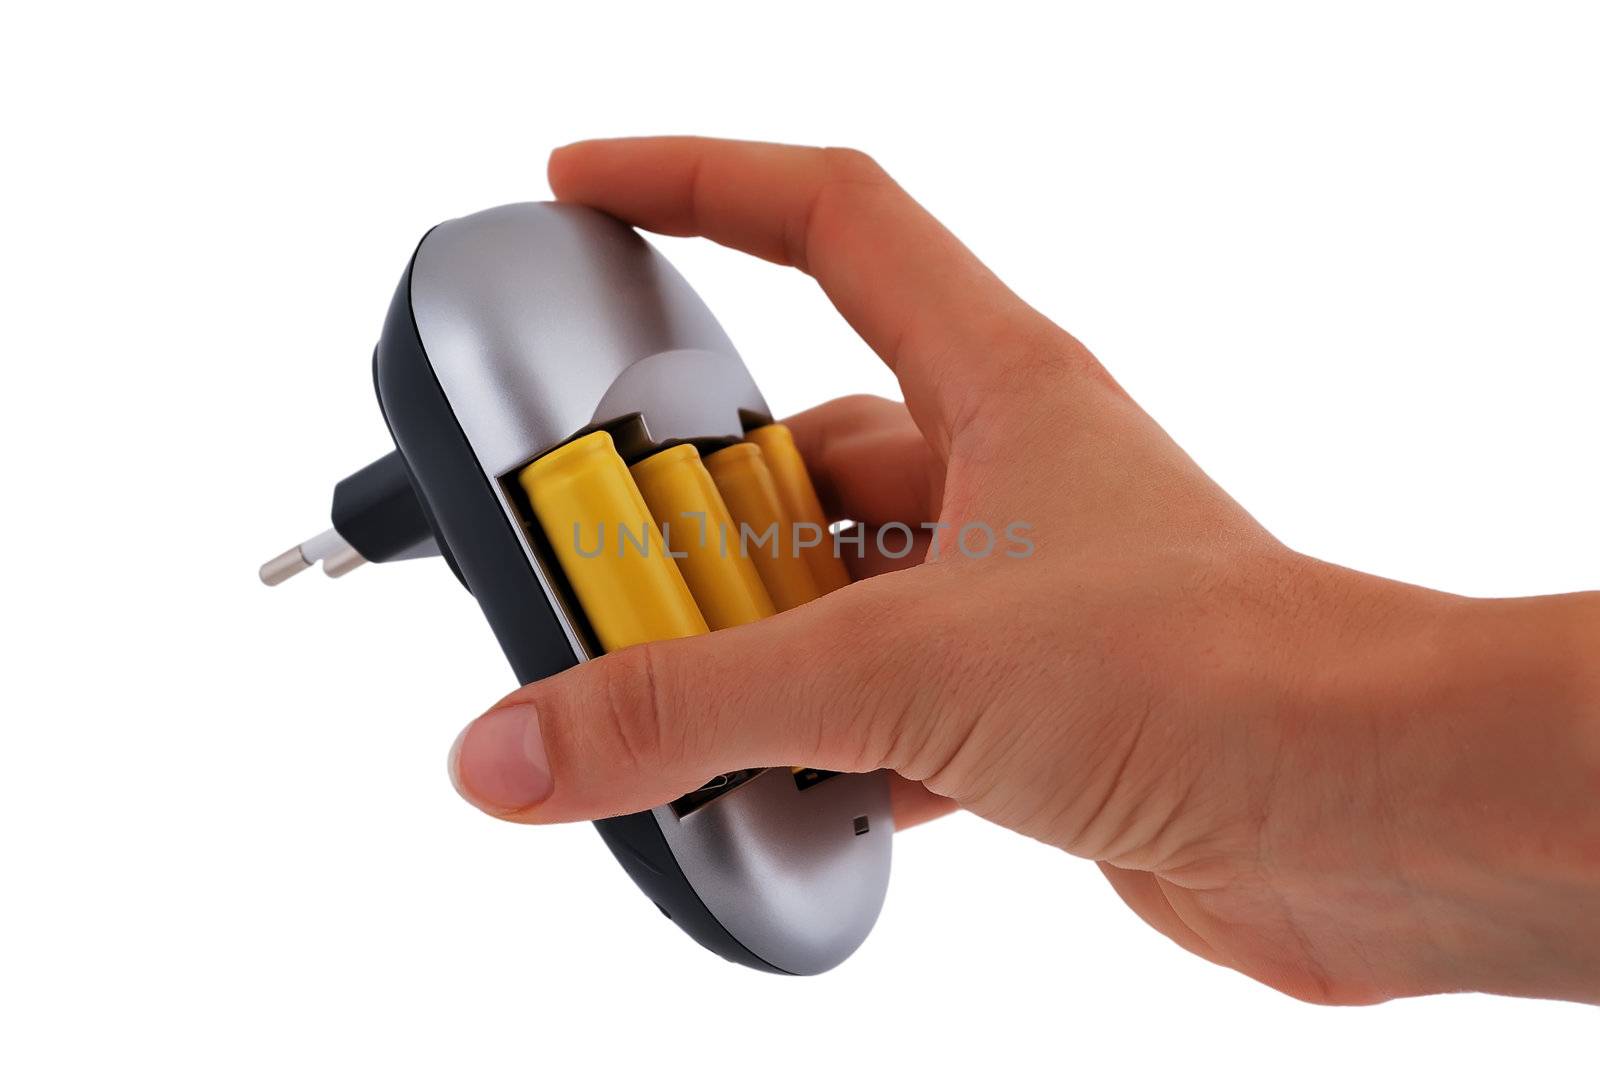 Charger with yellow batteries in hand on a white background